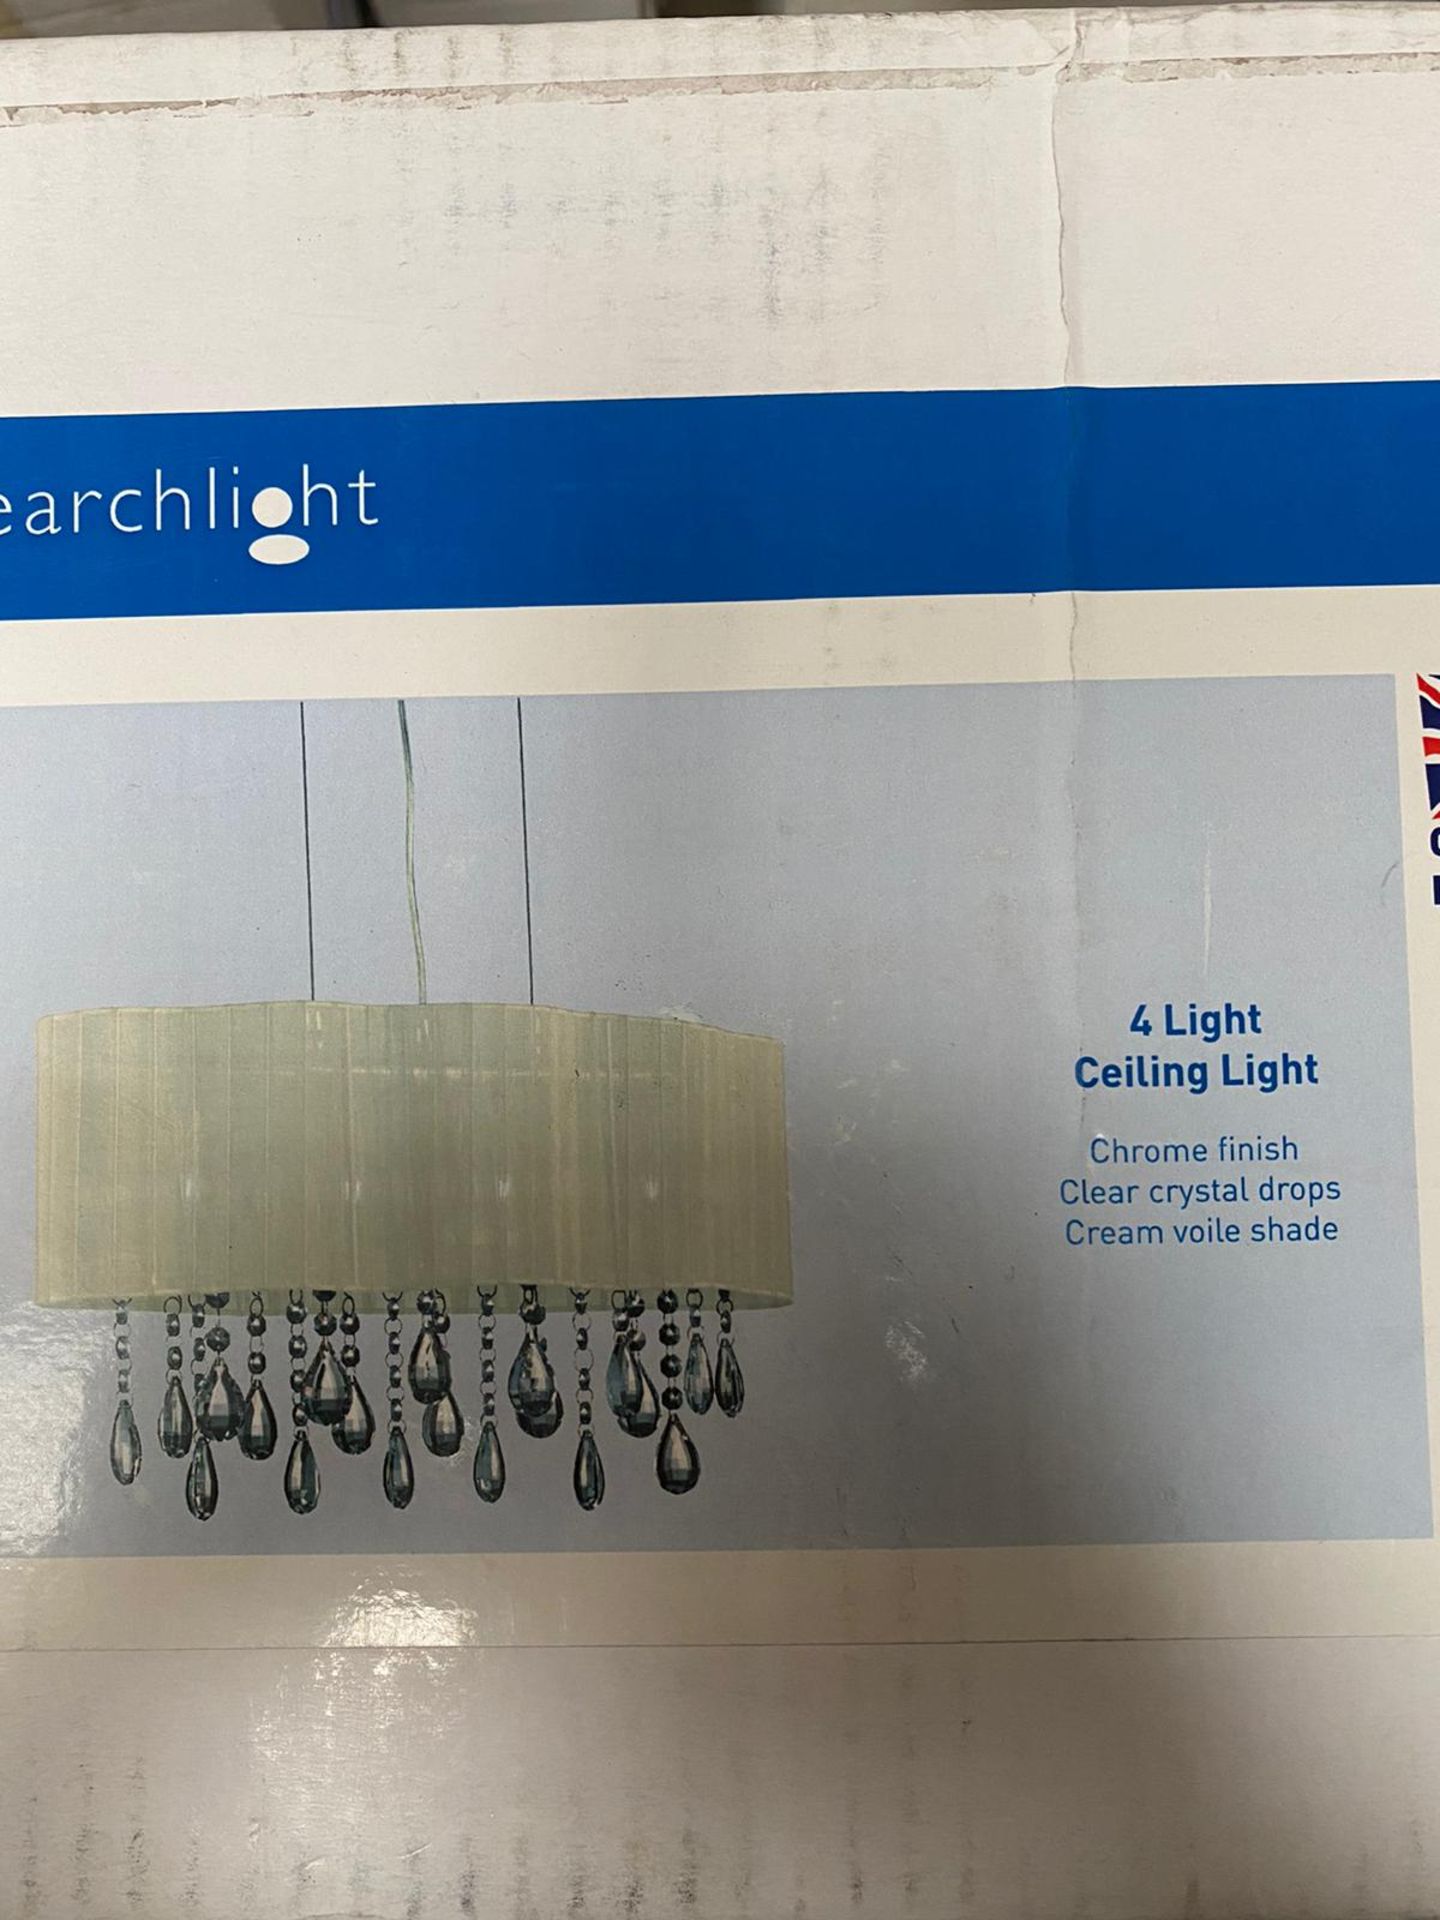 1 x Searchlight 4 light ceiling light in a chrome finish - Ref: 2224-4CR - New Boxed- RRP: £184.40